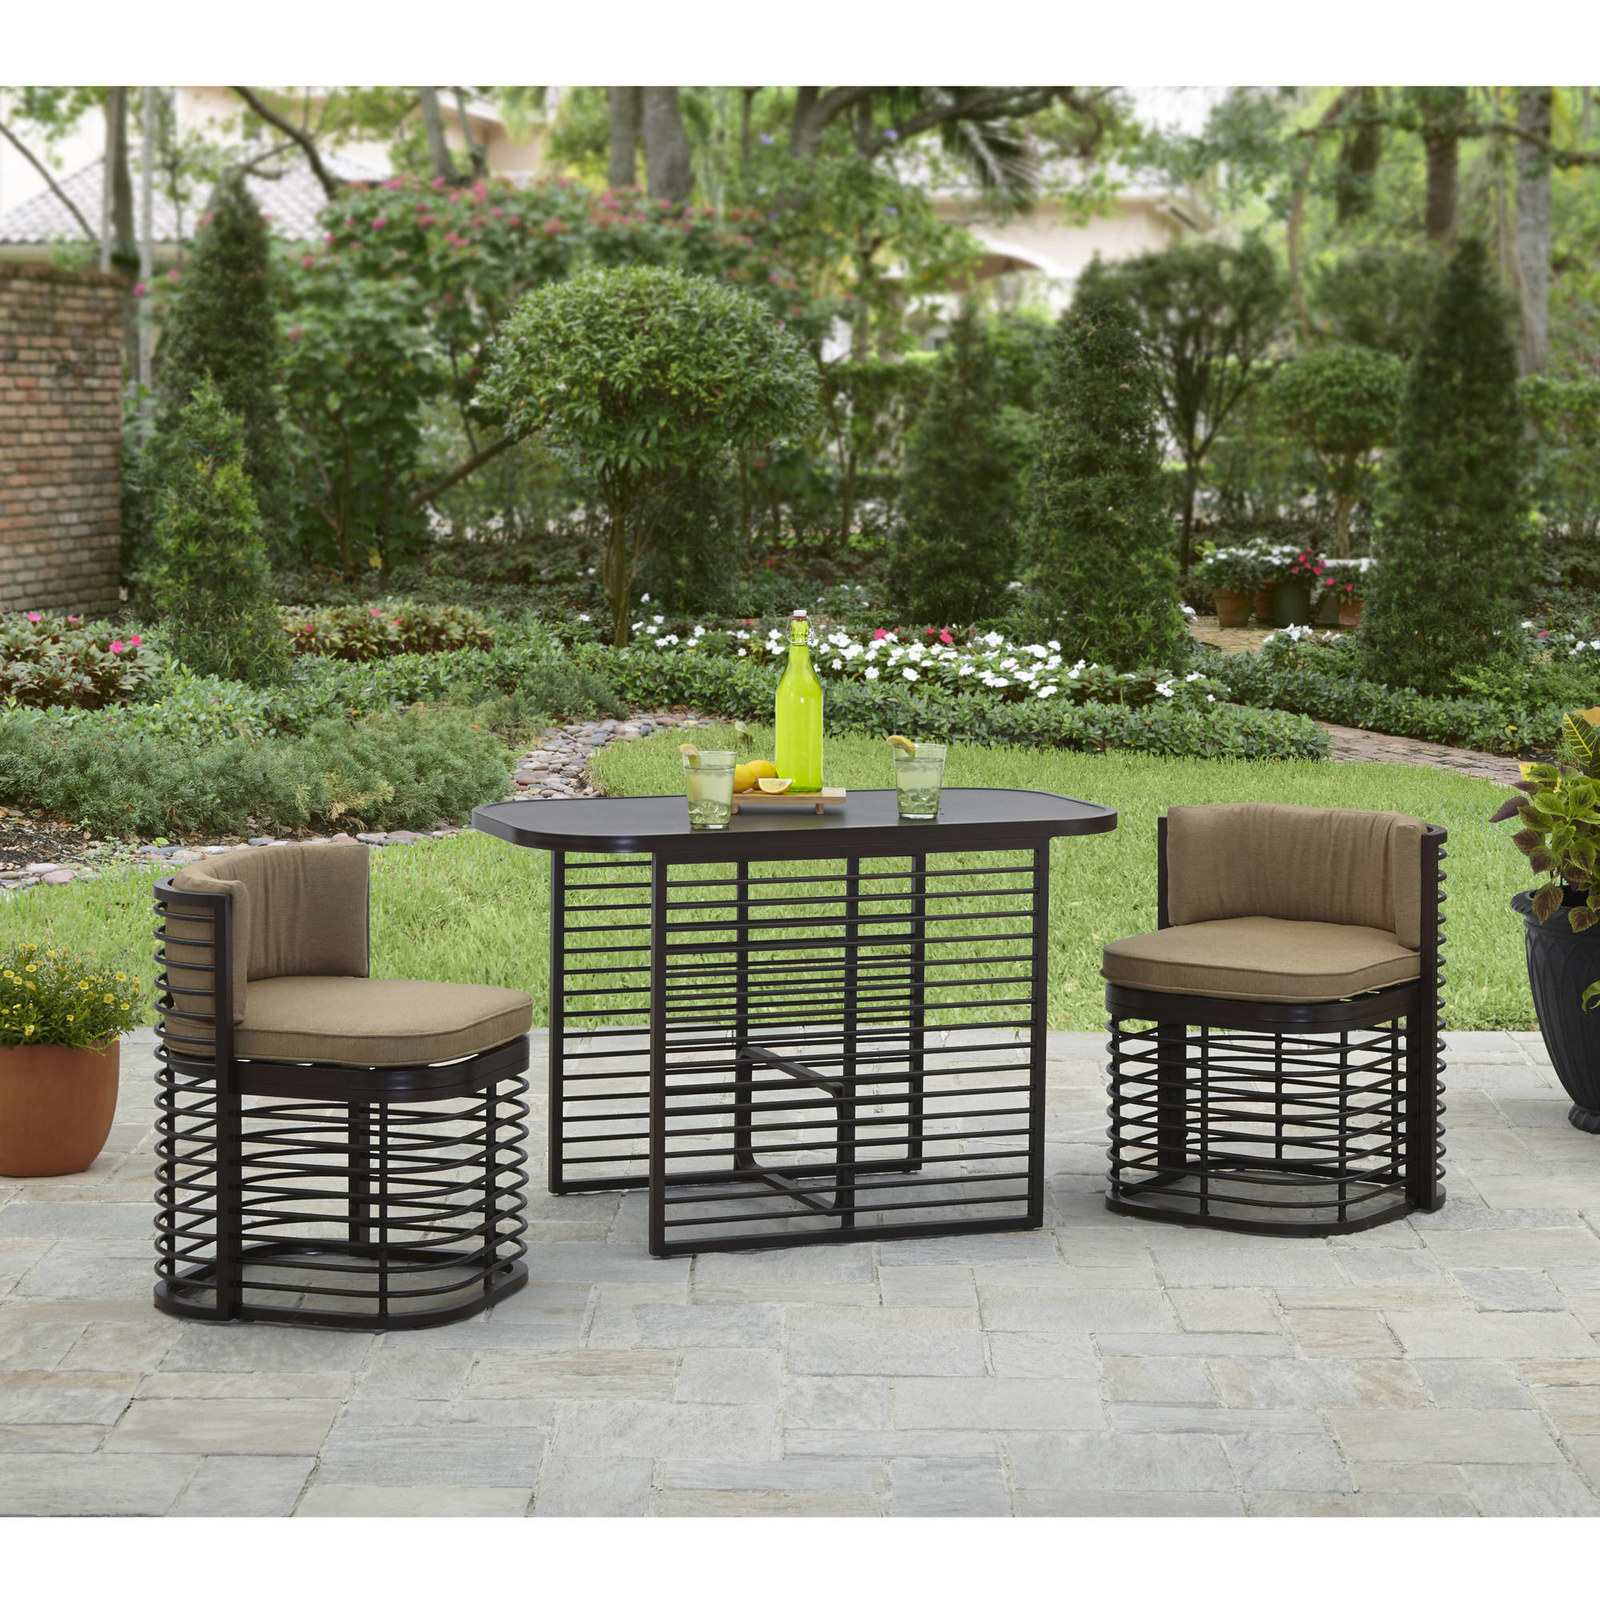 27 Stylish Pieces Of Outdoor Furniture From Walmart That Only Look